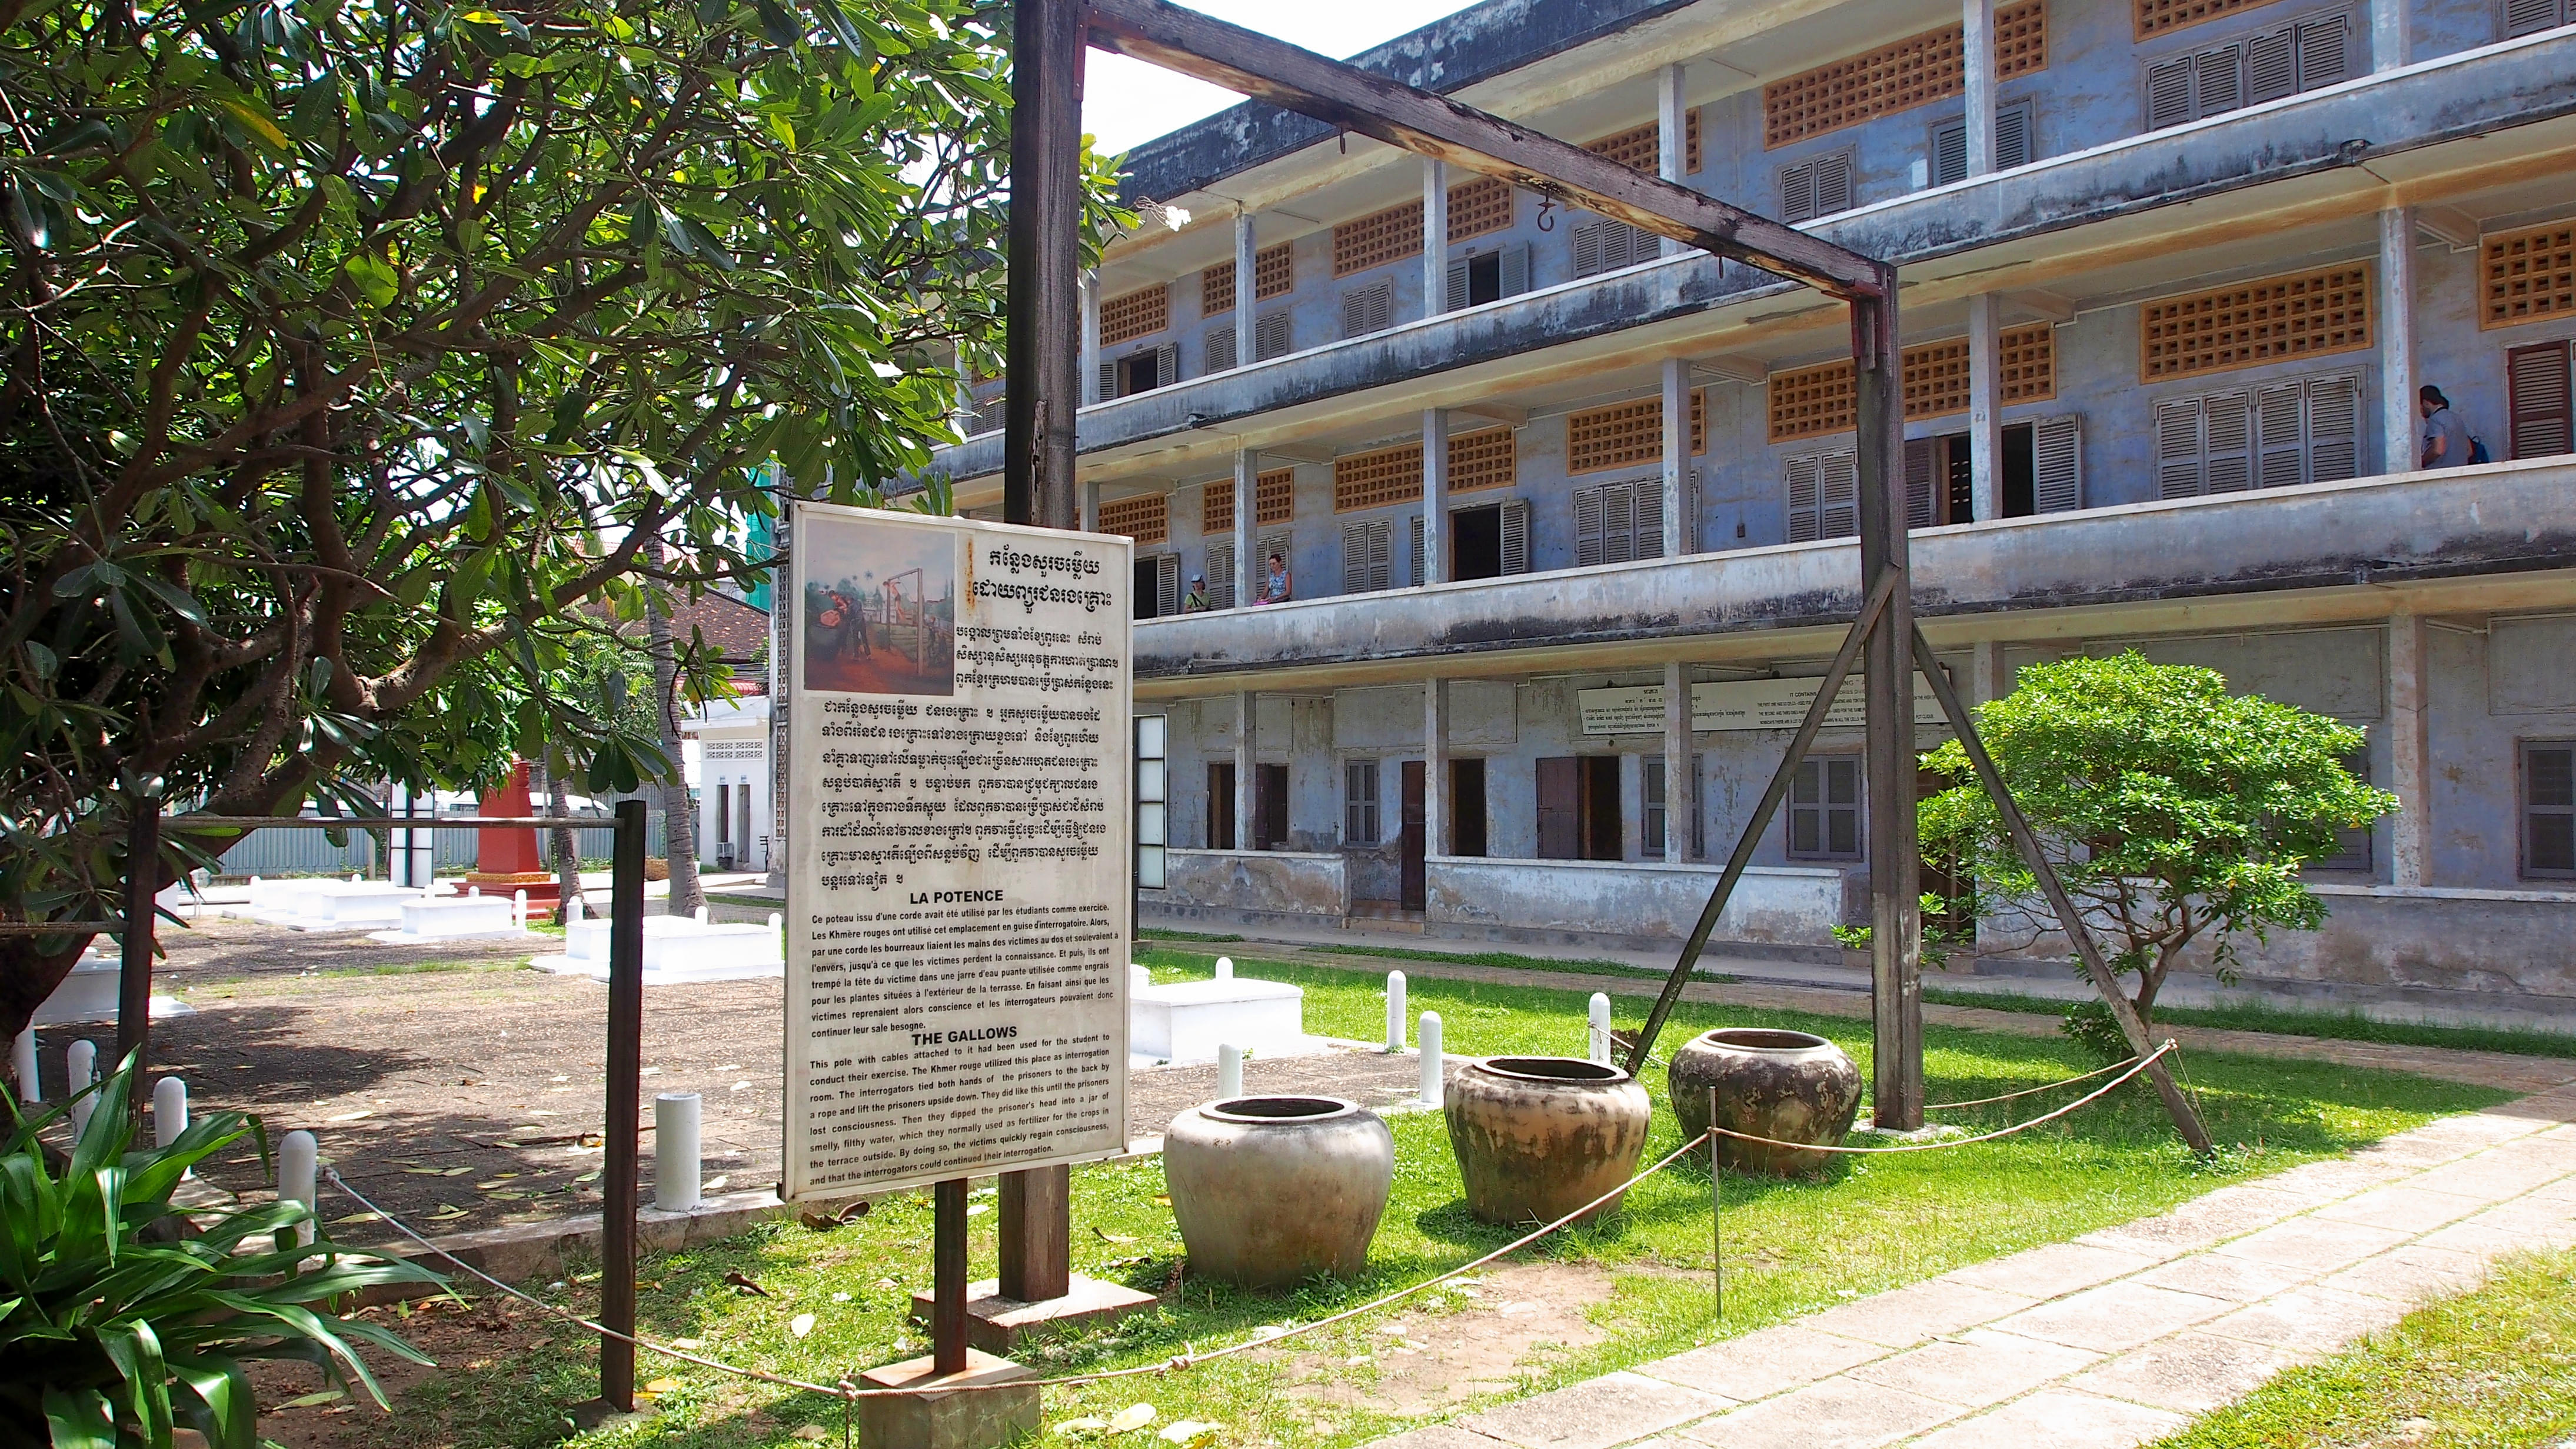 Tuol Sleng Genocide Museum